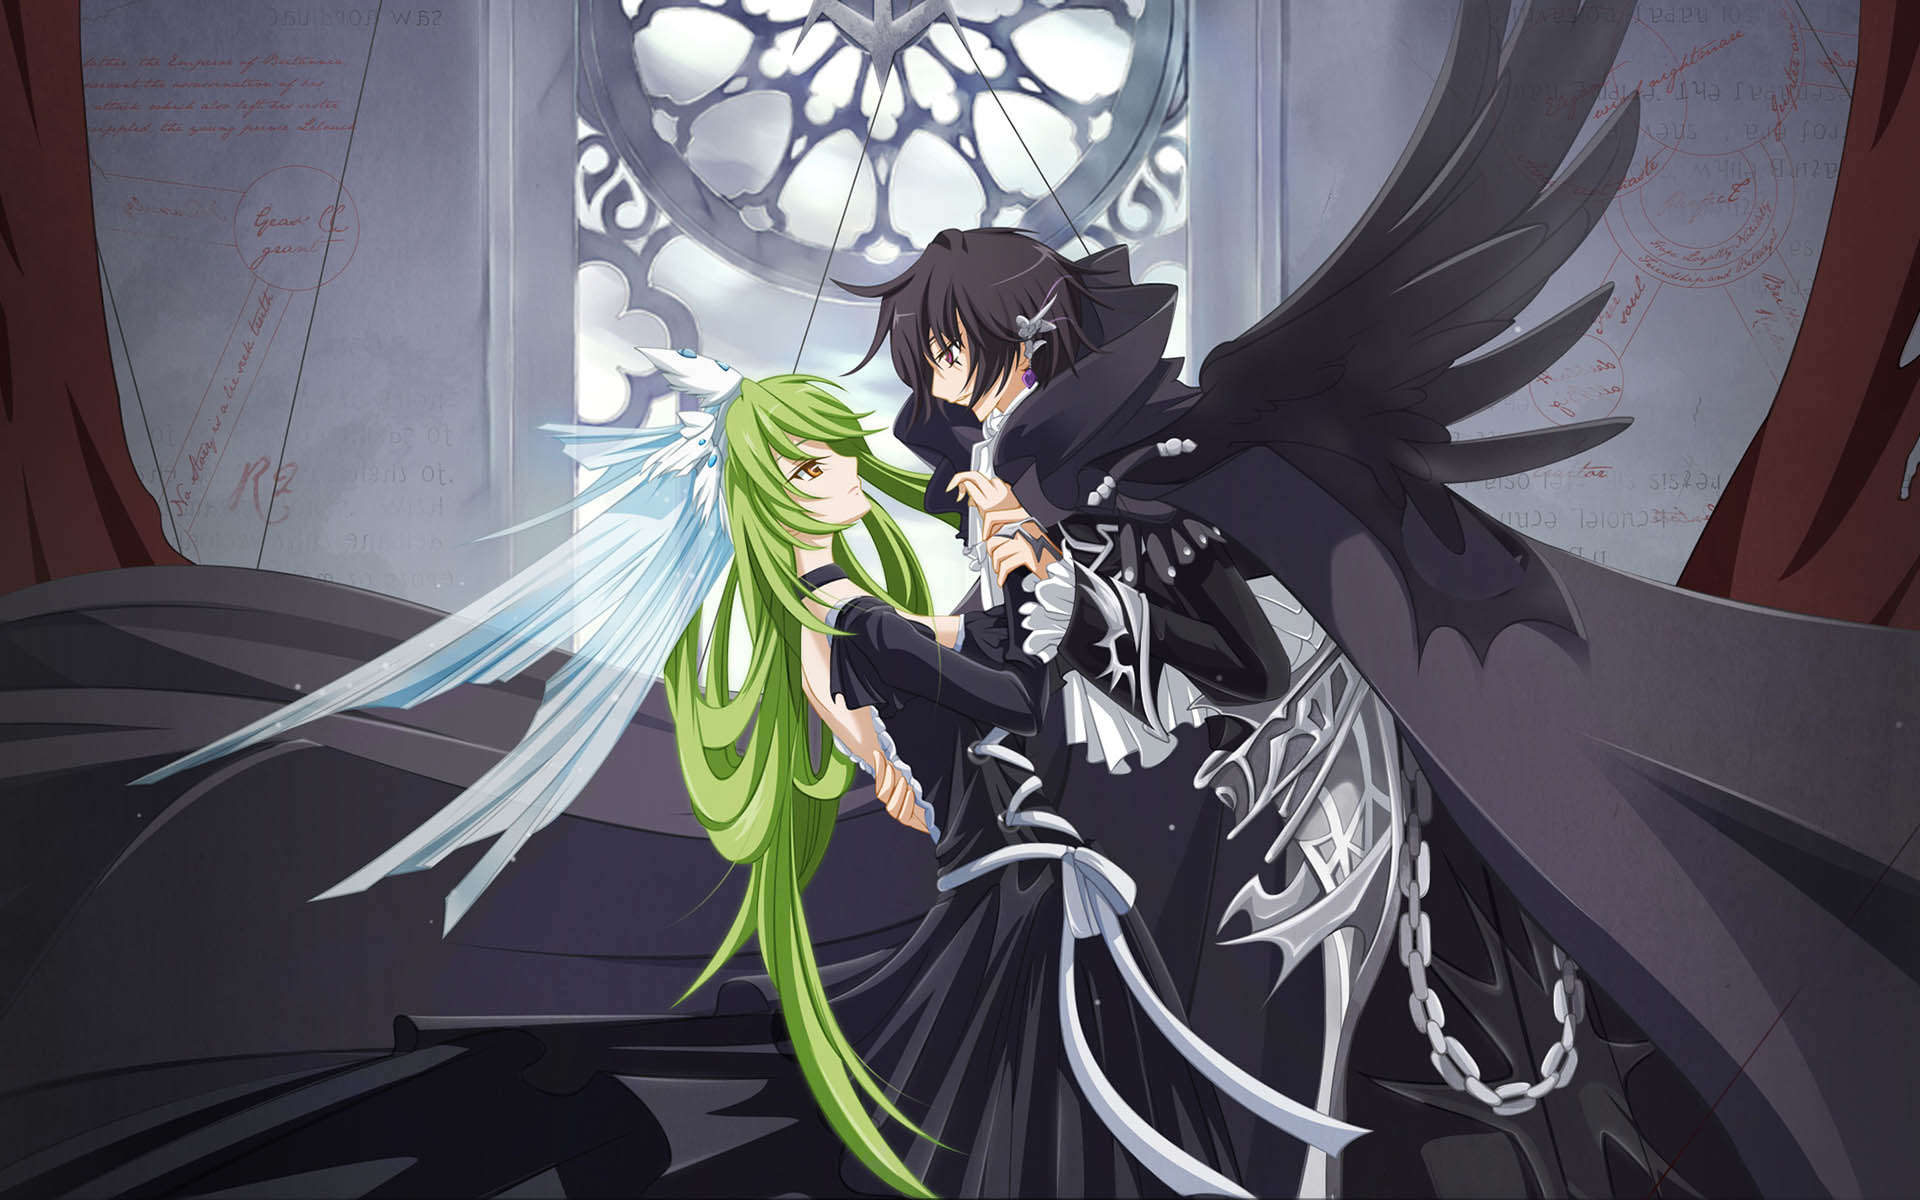 Lelouch and C.C. (Code Geass)